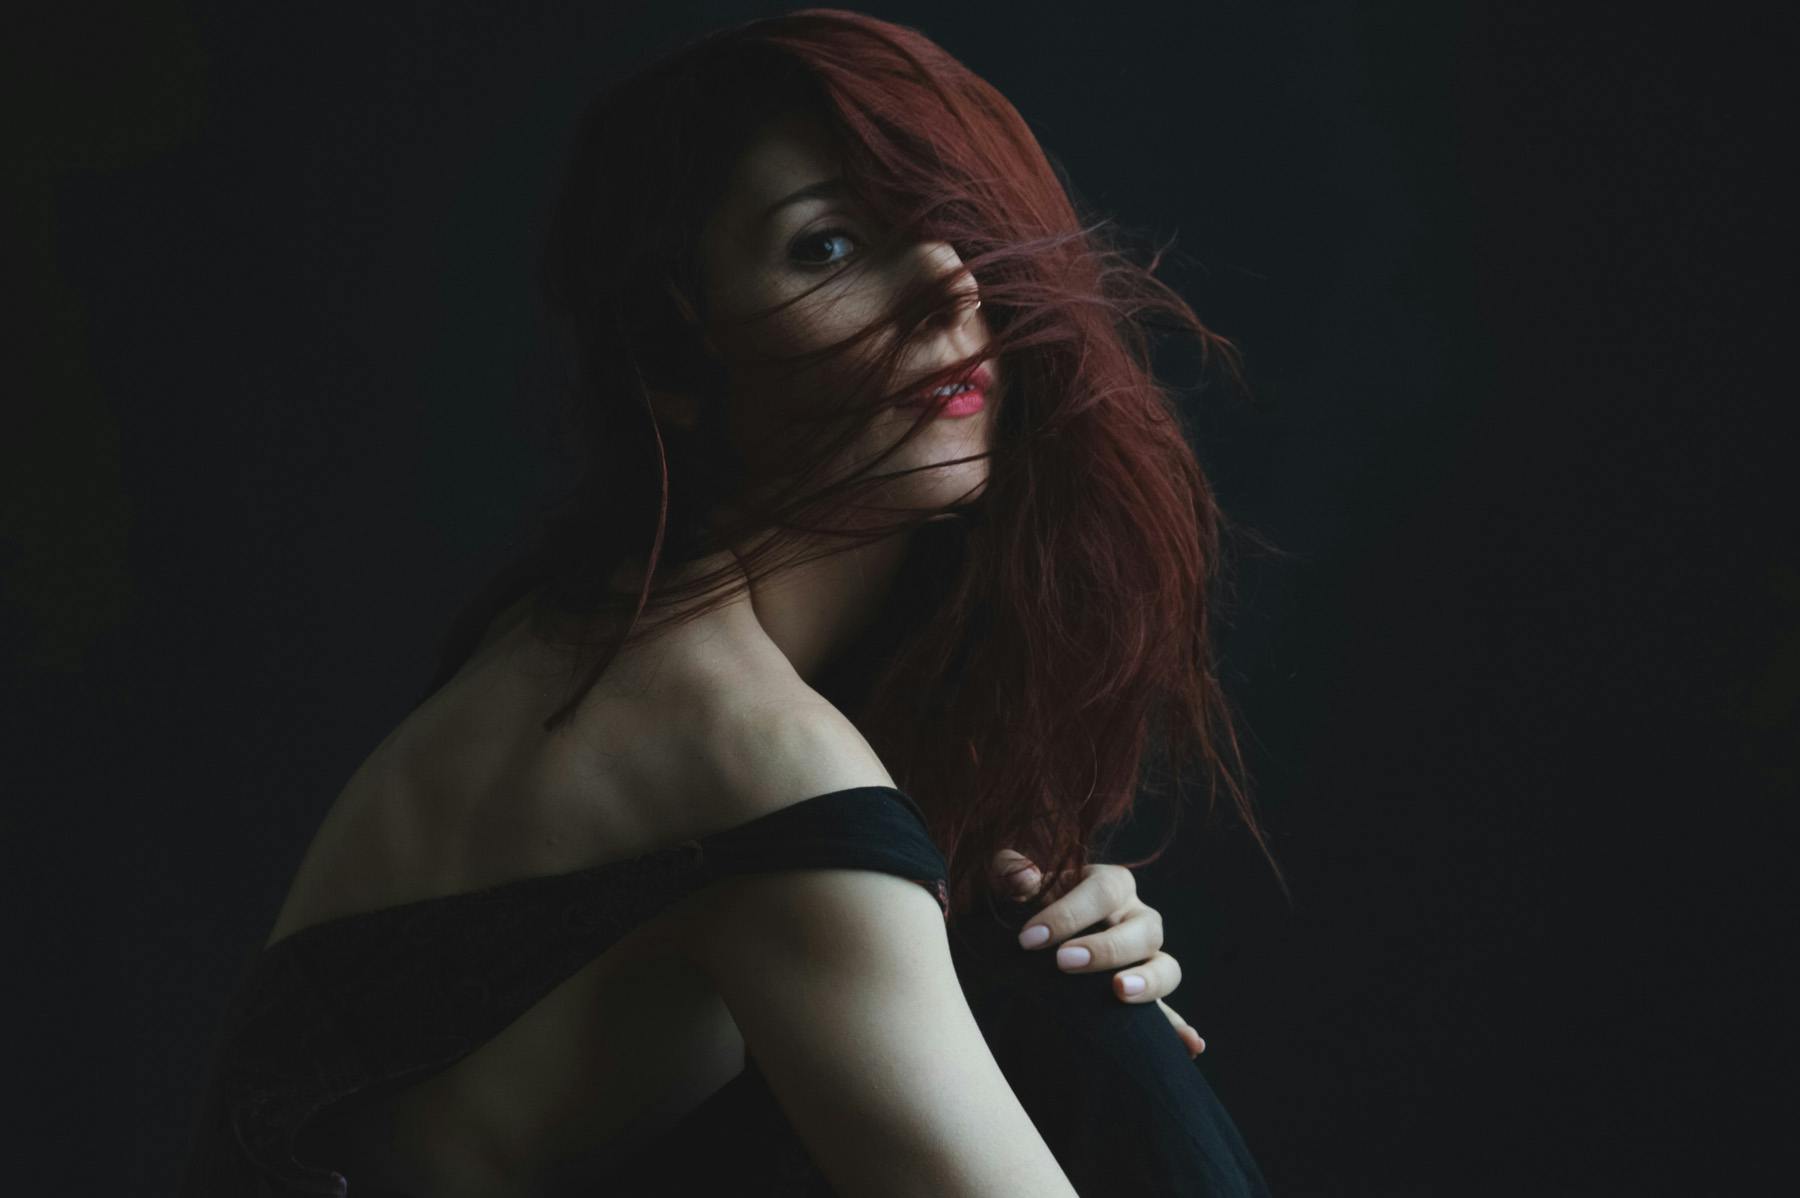 a portrait of Jana sitting in front of a black background with her dark red hair flowing in front of her face looking slightly towards the camera, her skin is light and you can clearly see the definition of her muscles.